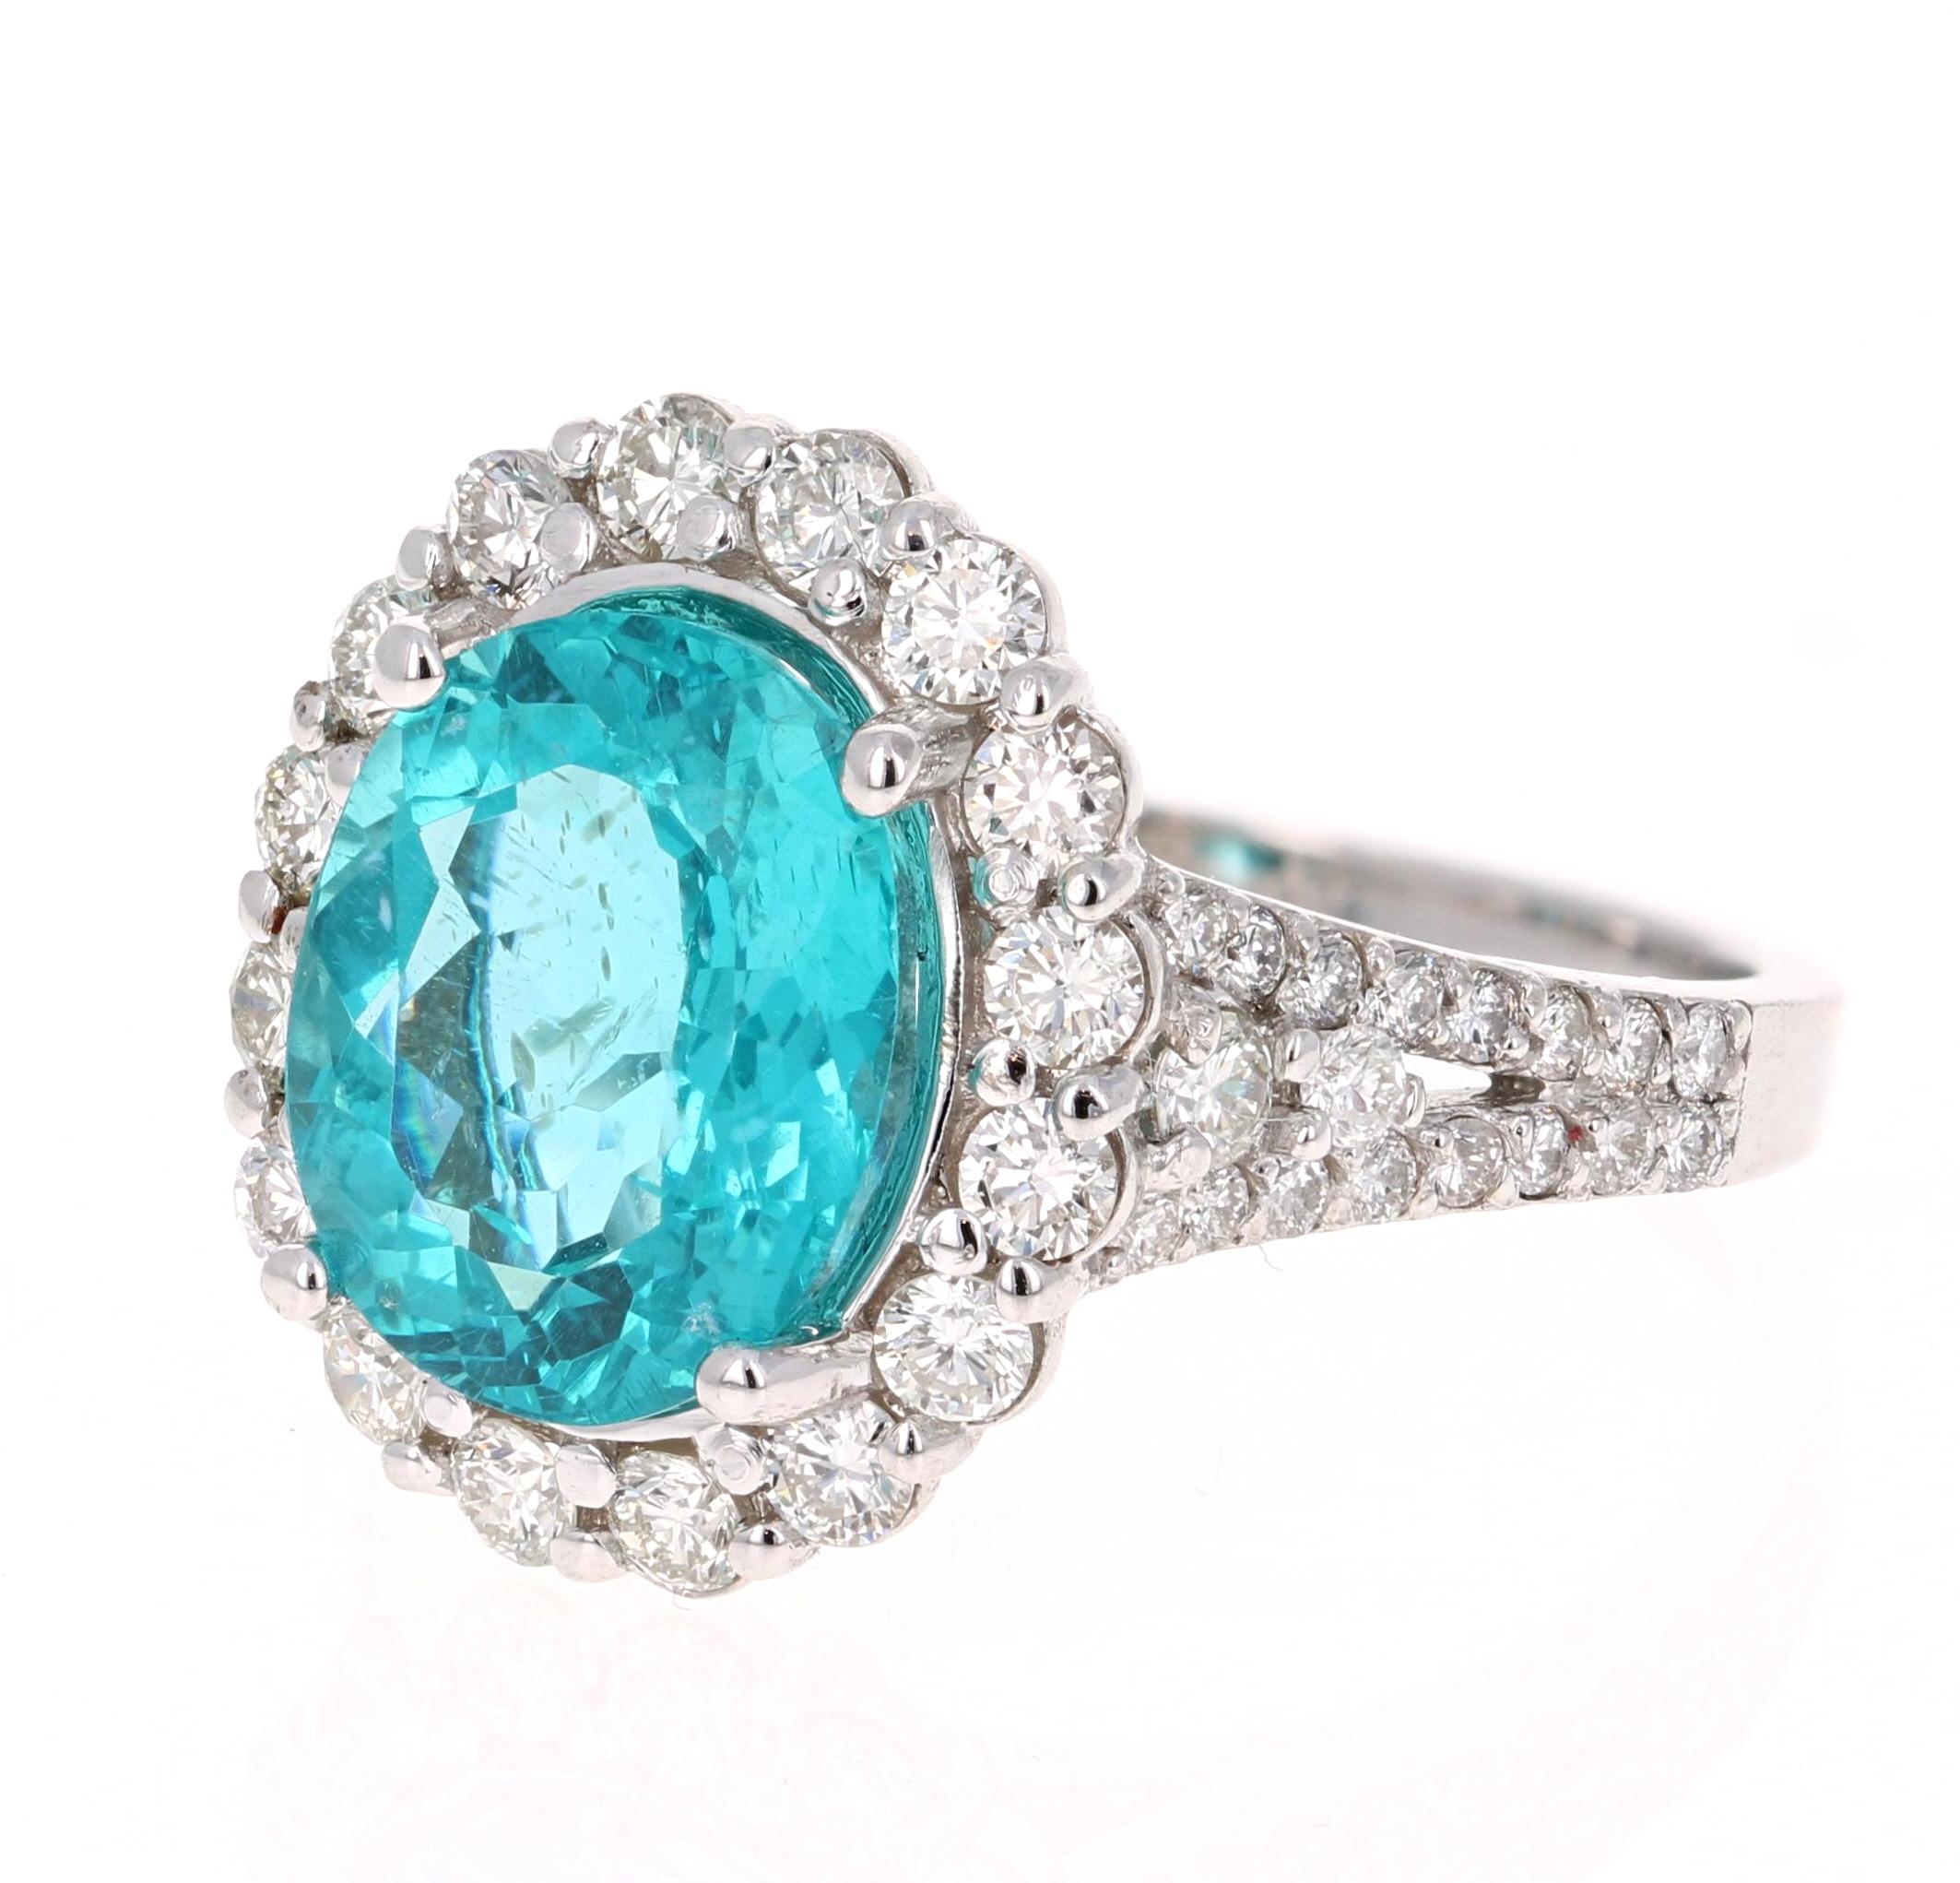 Stunning 5.07 Carat Apatite Diamond White Gold Bridal Ring that is sure to elevate your accessory collection or it can even be a great substitute for an Engagement Ring!

The ring has a 3.96 carat Oval Cut Apatite set in the center of the ring